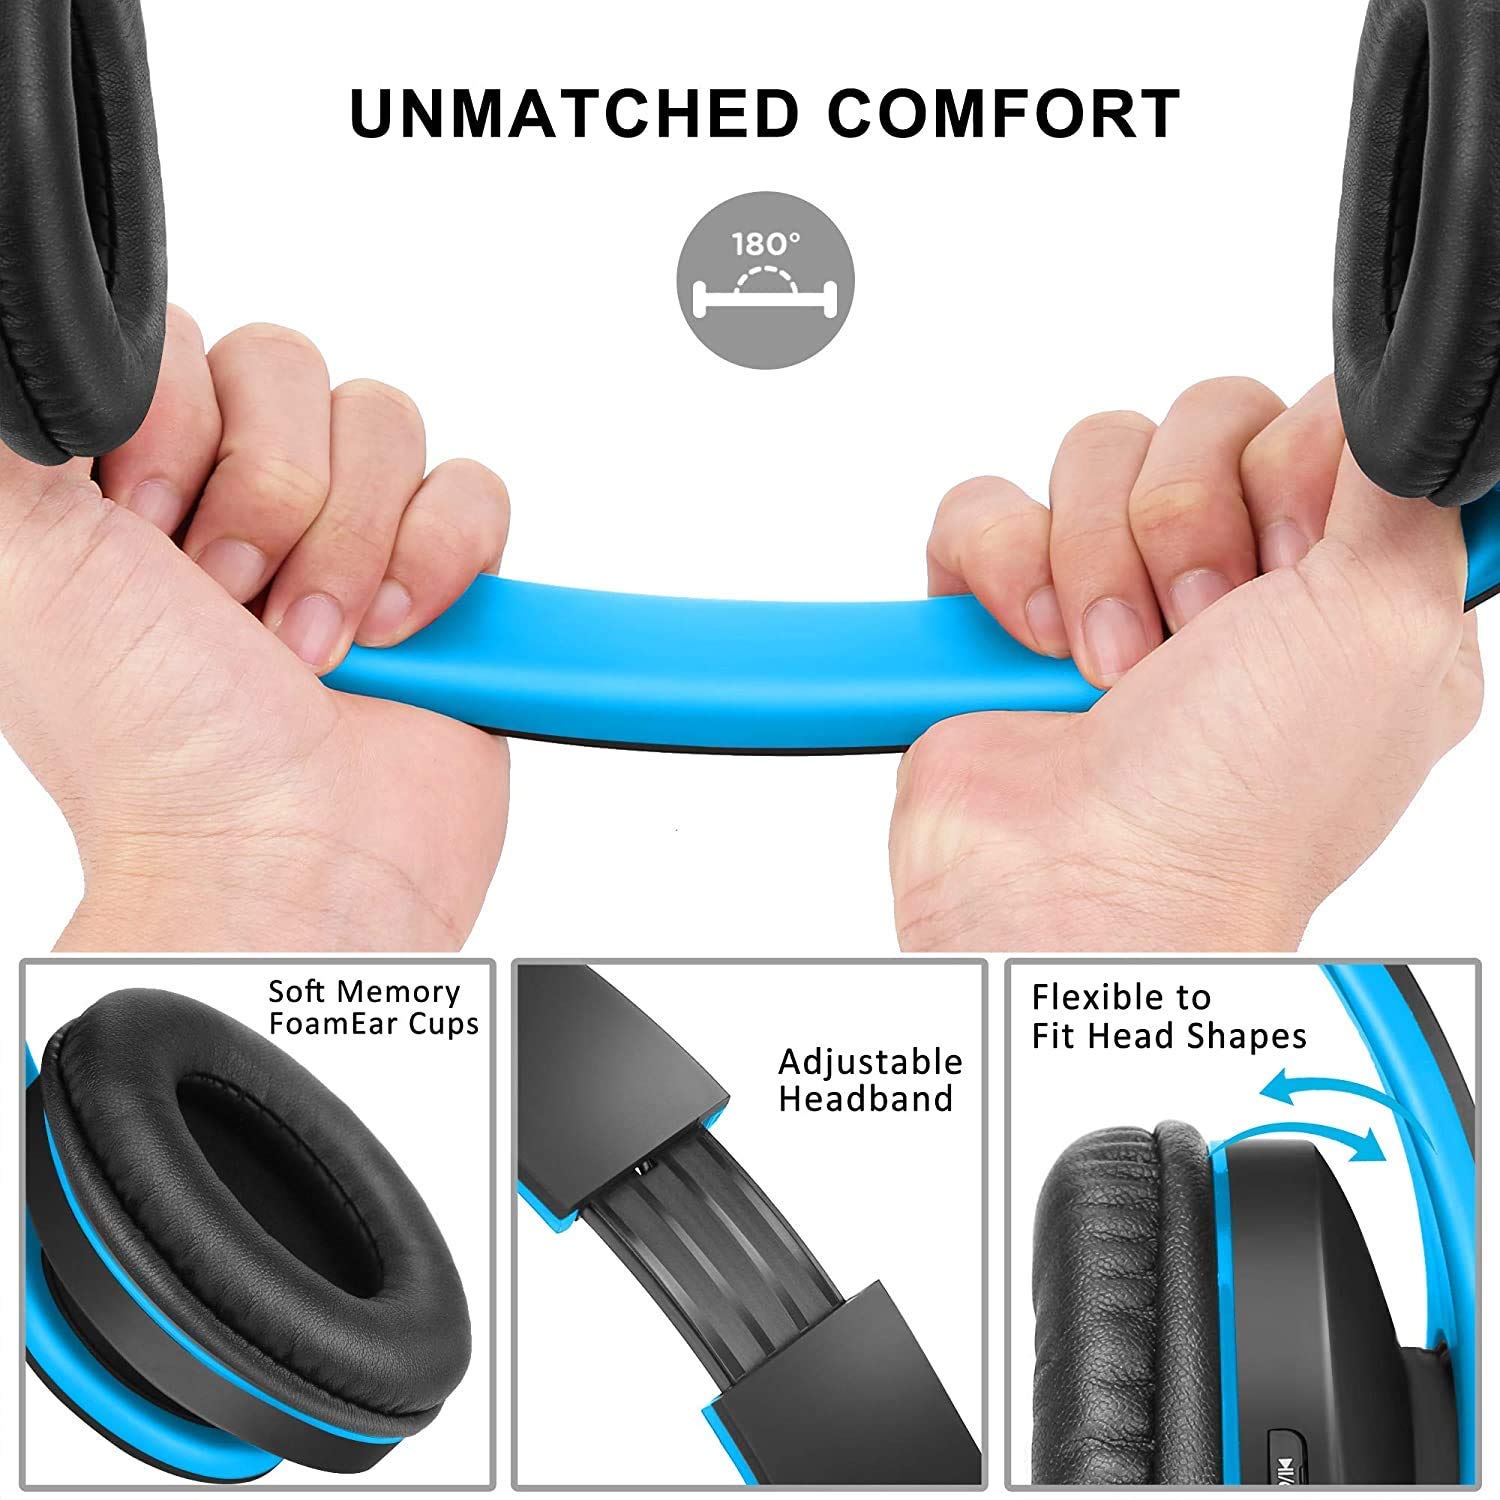 ZIHNIC Bluetooth Headphones Over-Ear, Foldable Wireless and Wired Stereo Headset Micro SD/TF, FM for Cell Phone,PC,Soft Earmuffs &Light Weight for Prolonged Wearing (Black/Blue)